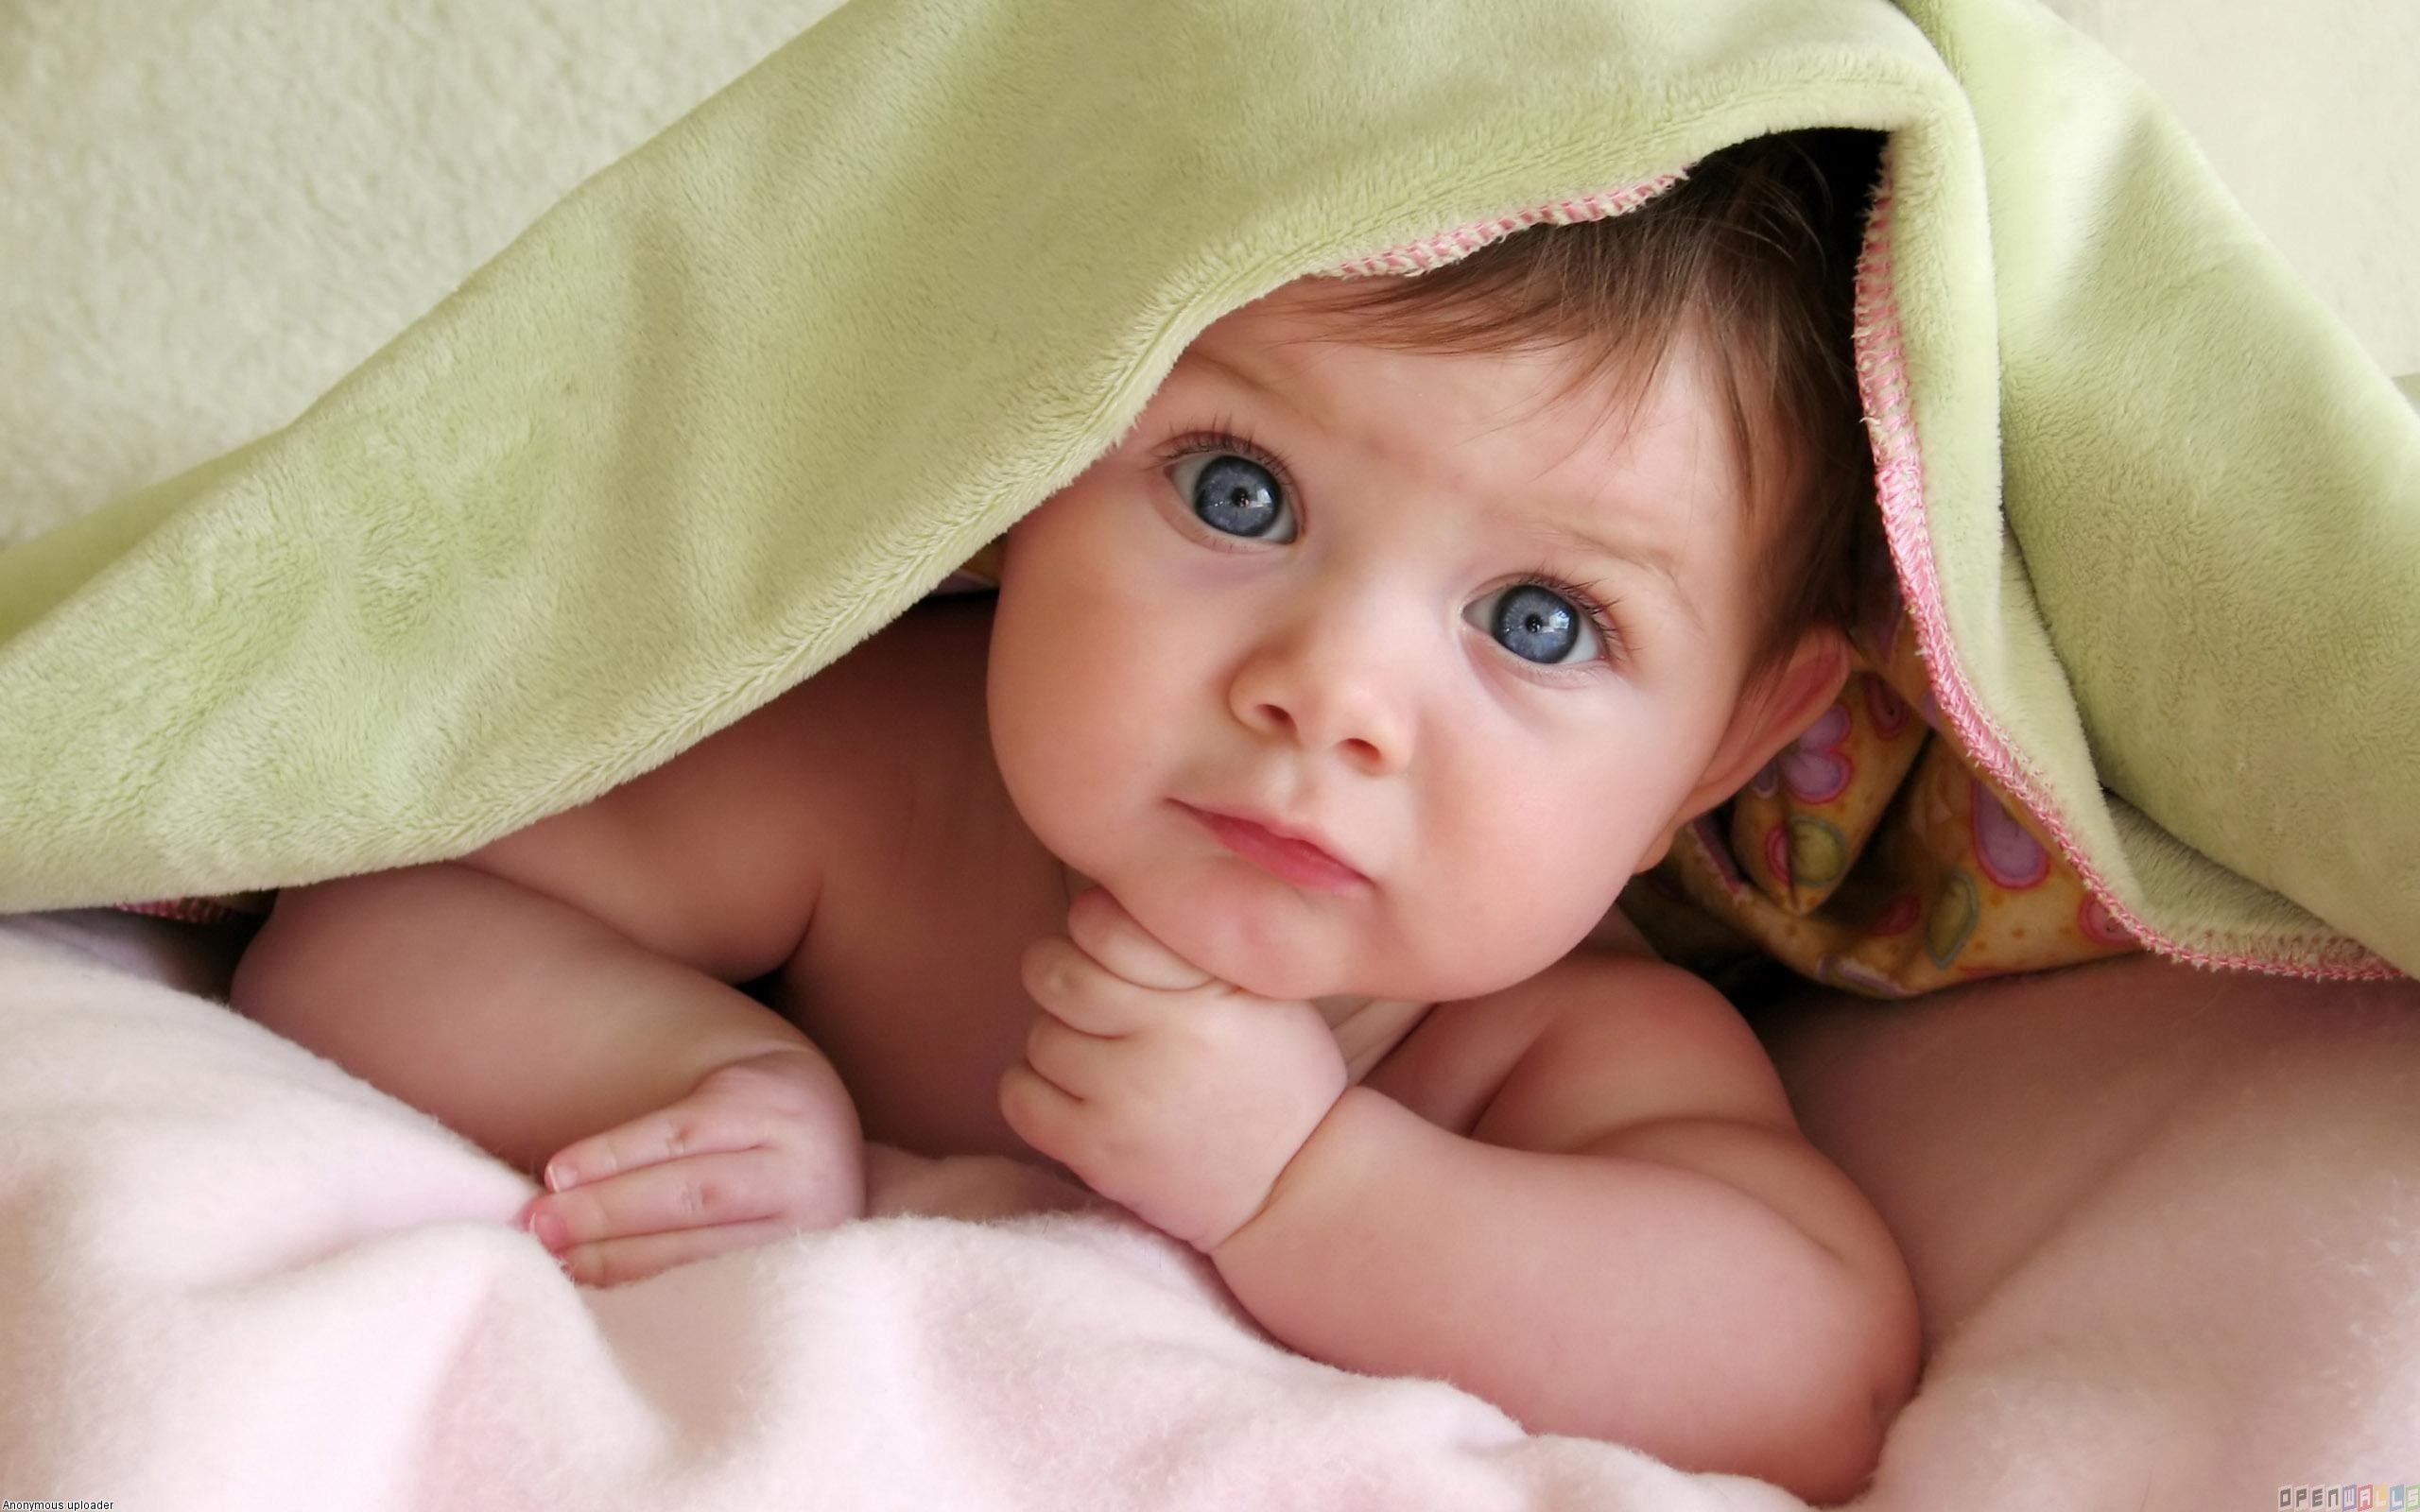 Adorable Baby Wallpaper Free Adorable Baby Background